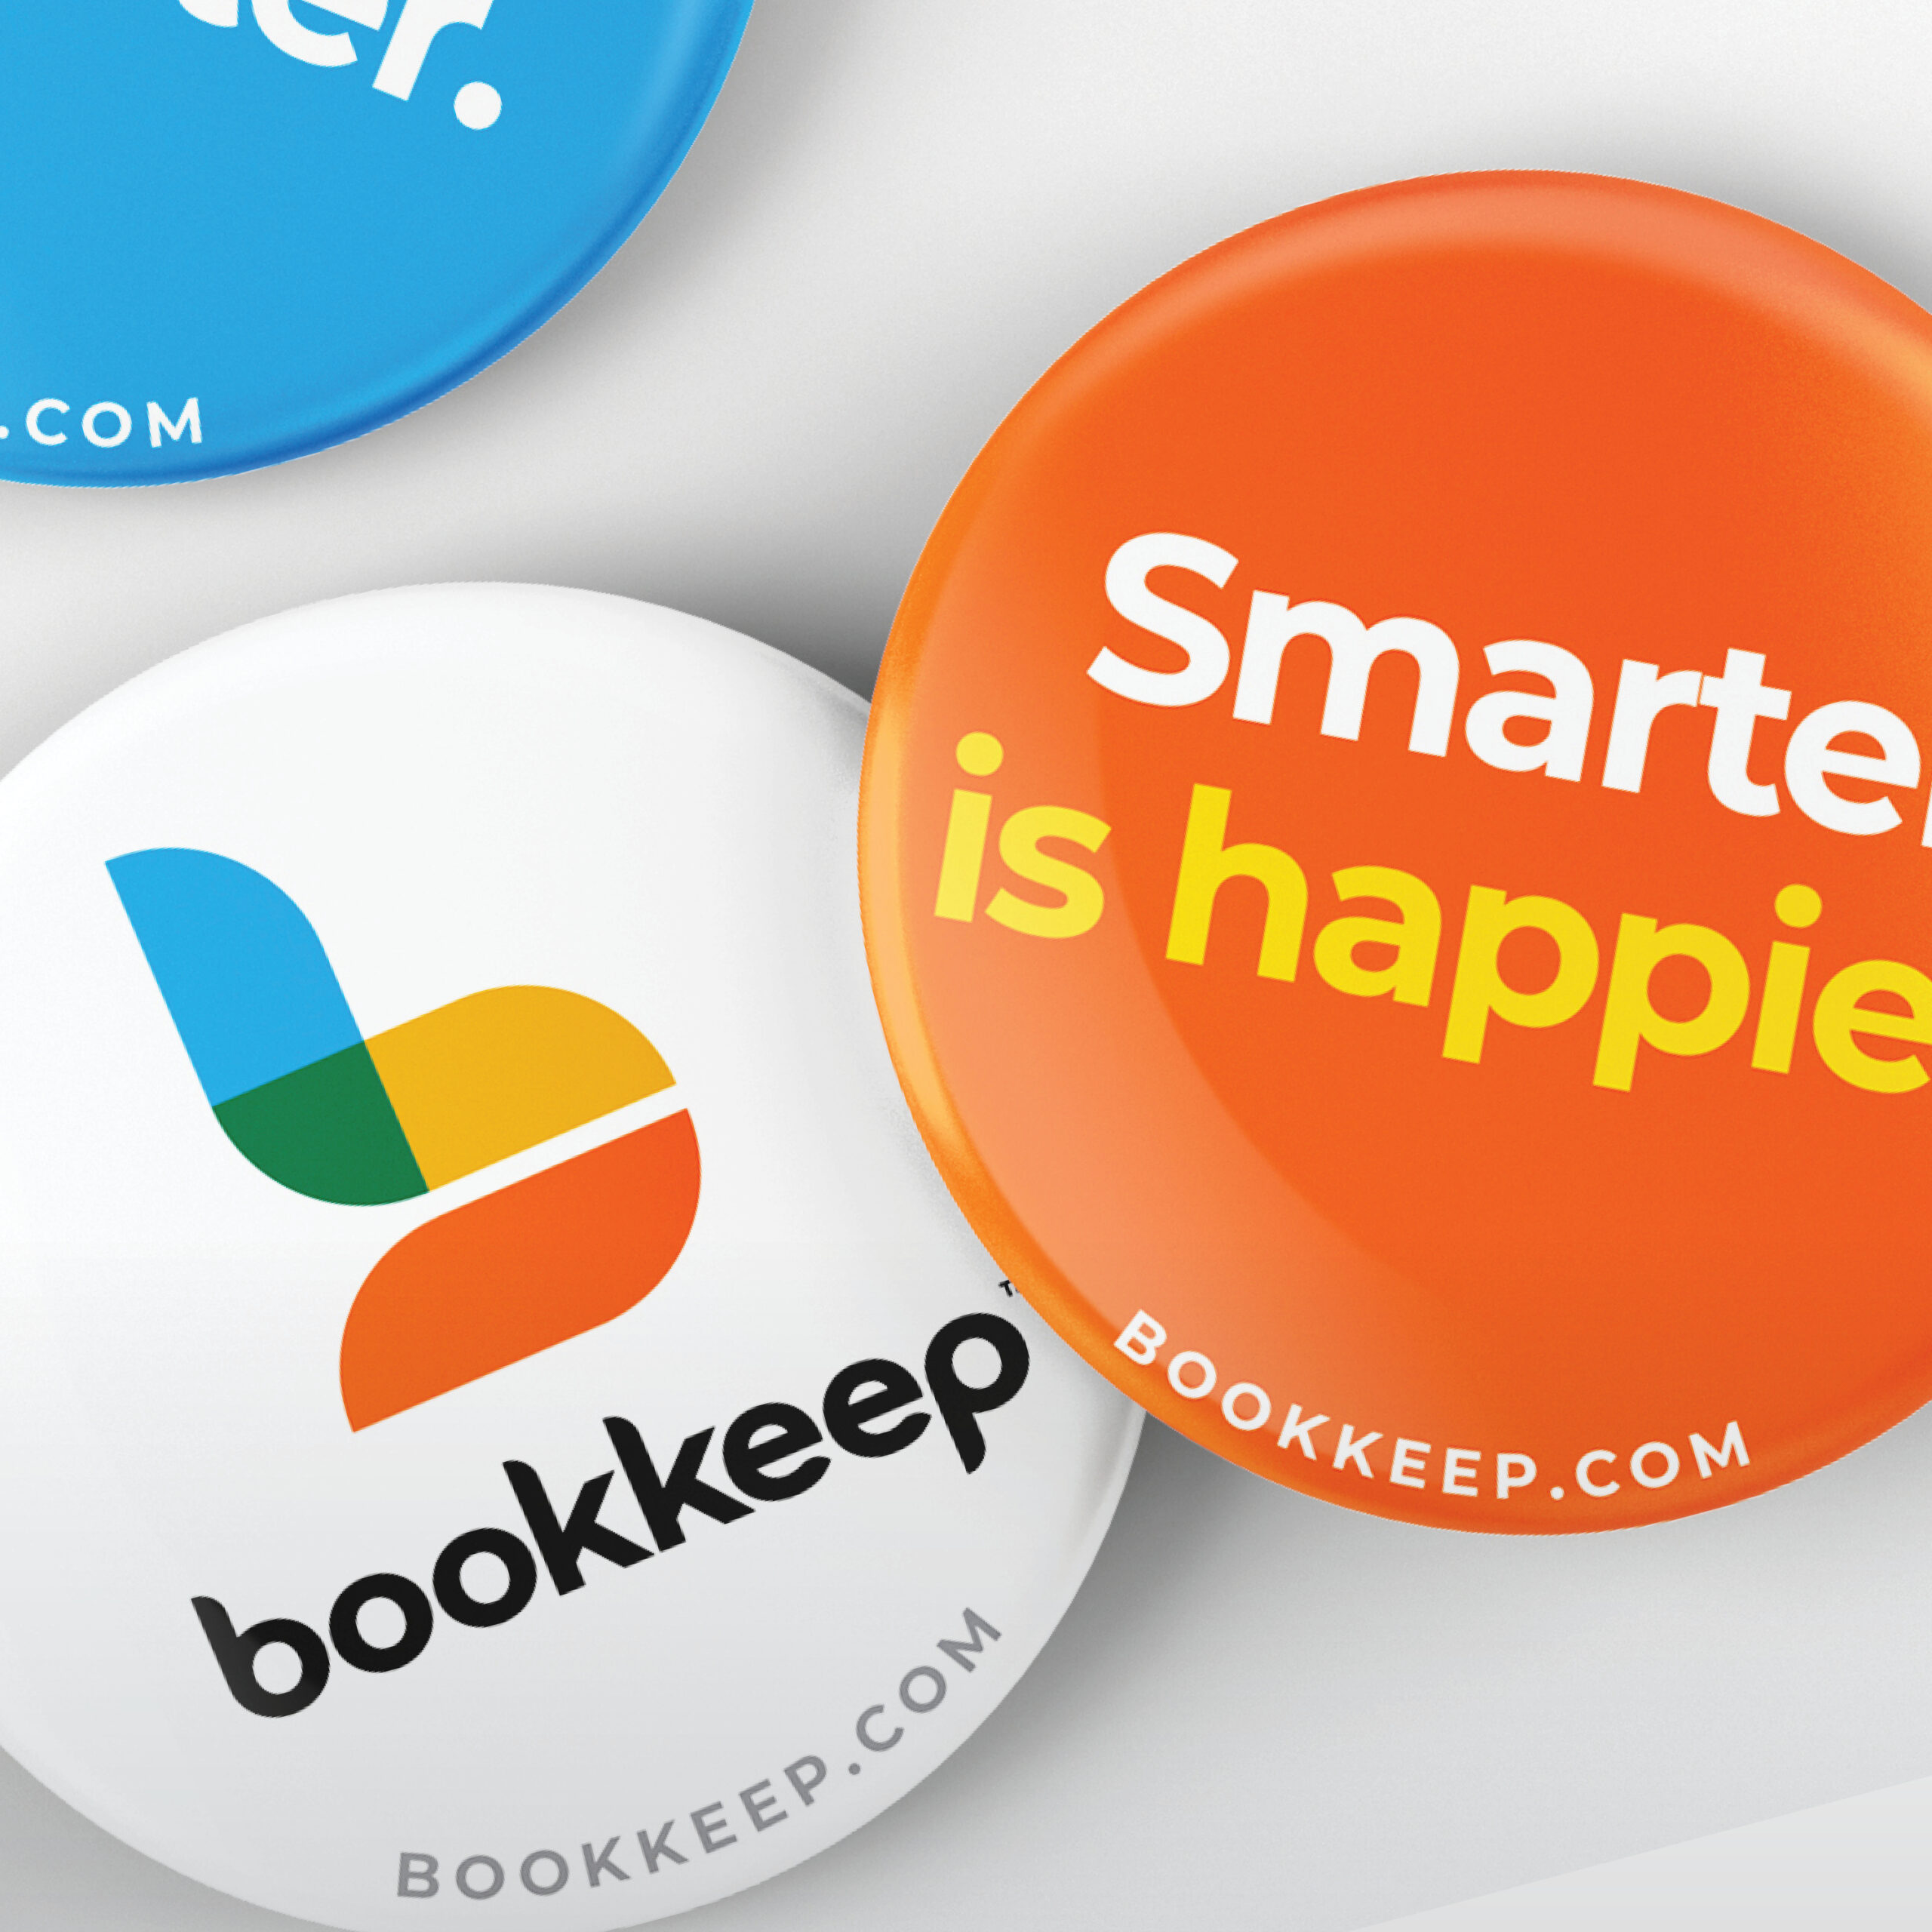 We took Bookkeep from bland to the smarter brand